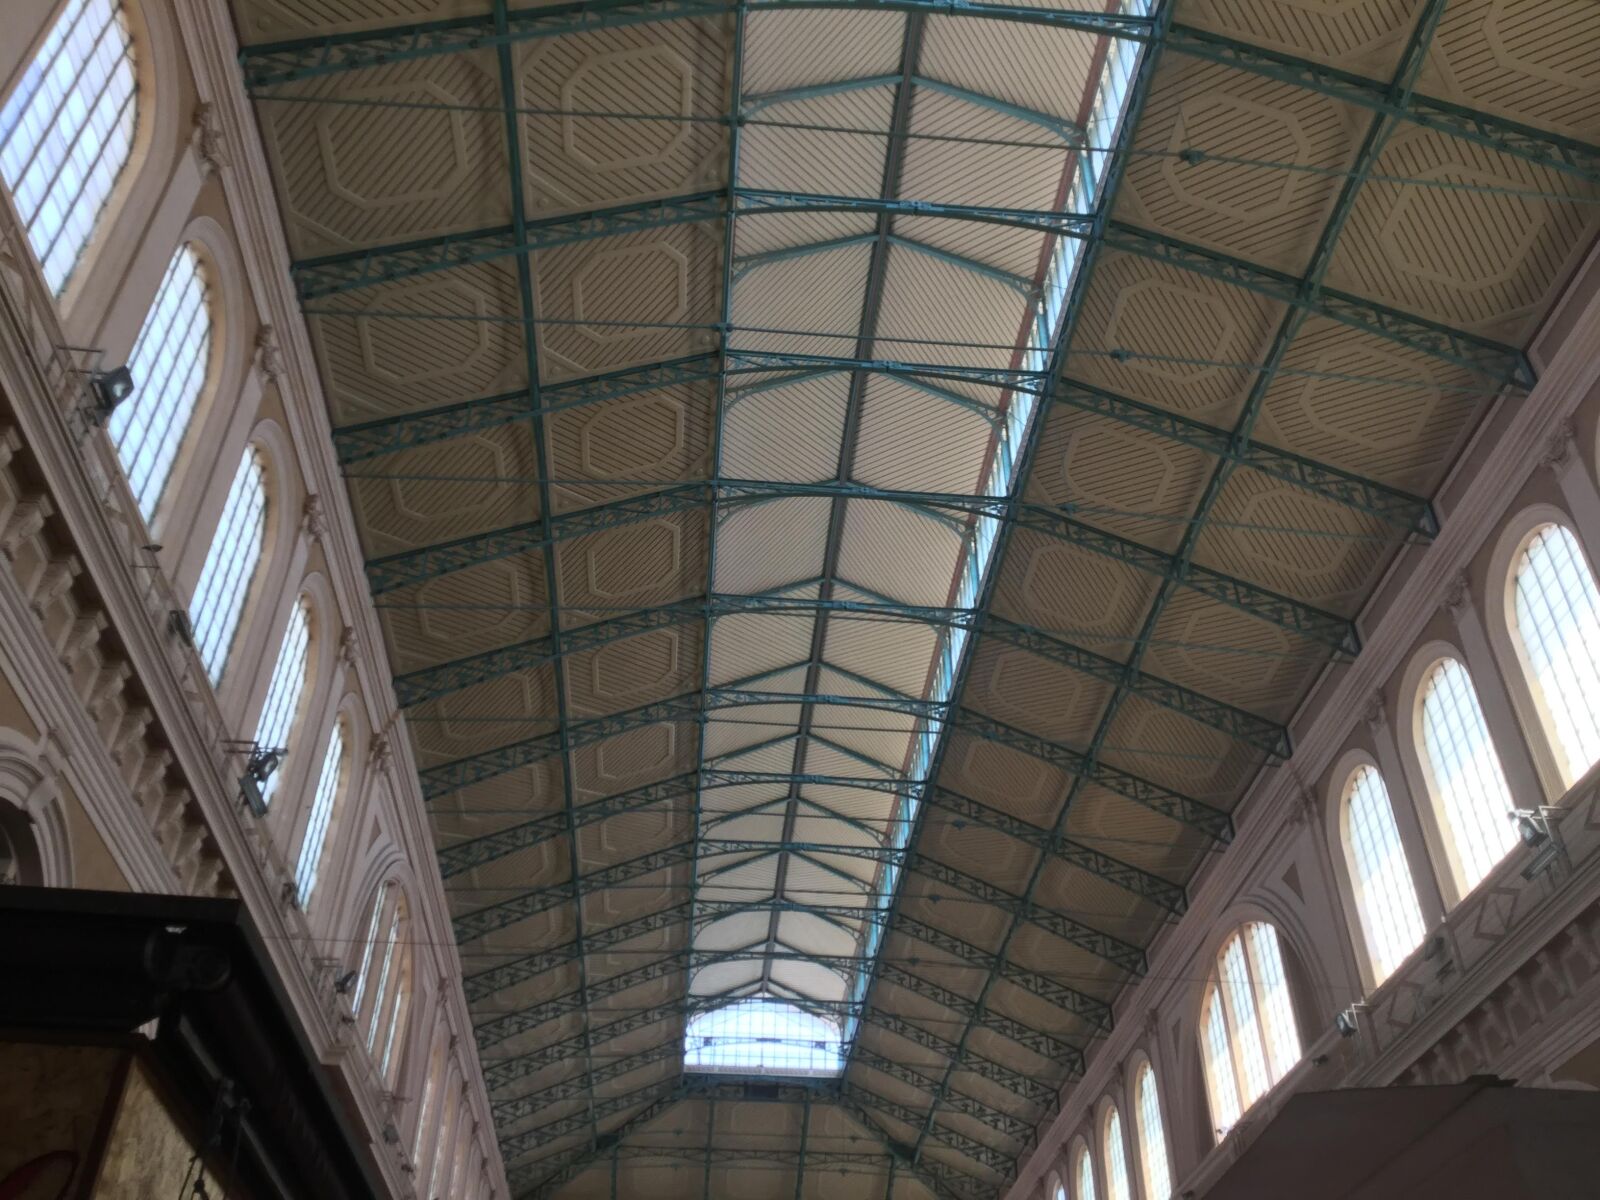 iPad Air 2 back camera 3.3mm f/2.4 sample photo. Roof, market, architecture photography